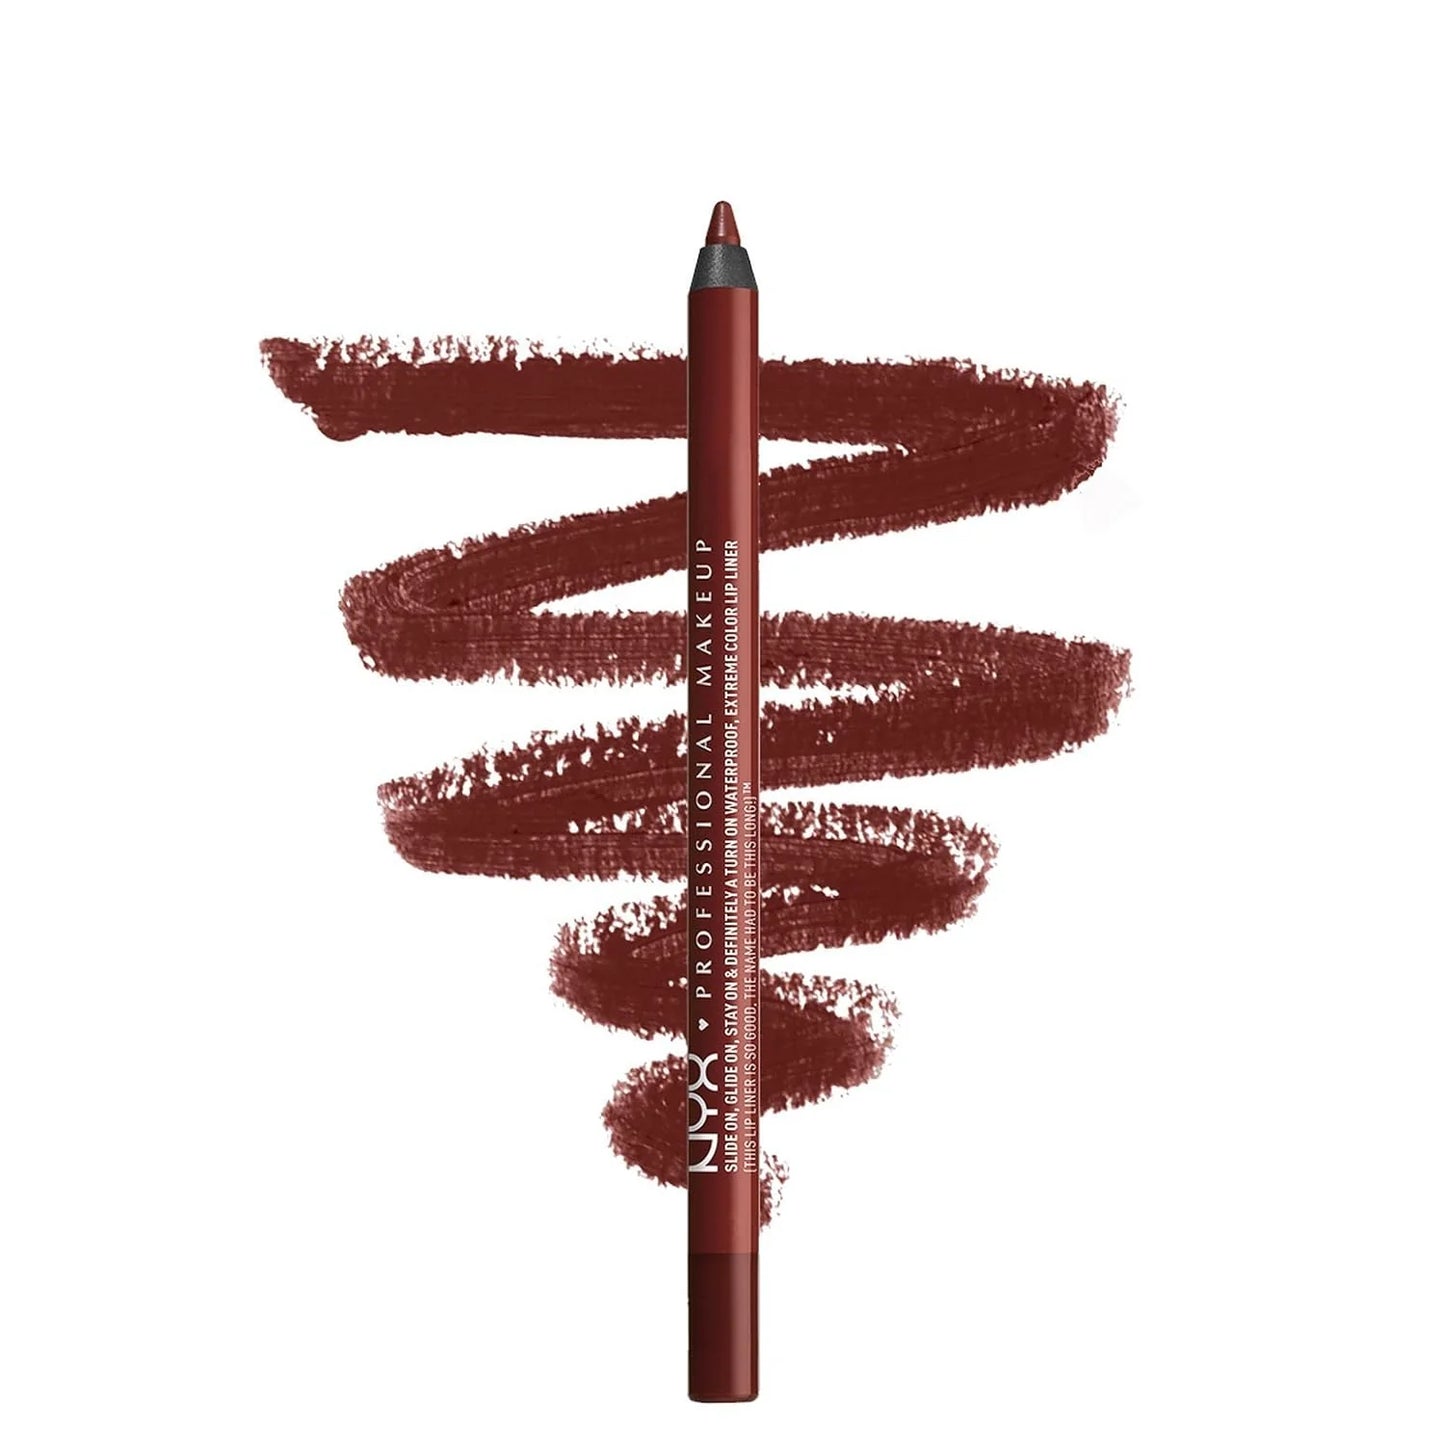 NYX Slide On Glide On Waterproof Lip Pencil - SLLP04 Brick House Pucker up and apply the Slide On Lip Pencil for rich, matte color. This waterproof pencil goes on extra smooth with a long-wearing finish. Line your lips to prevent pesky feathering, then fill them in to enrich color payoff and longevity.